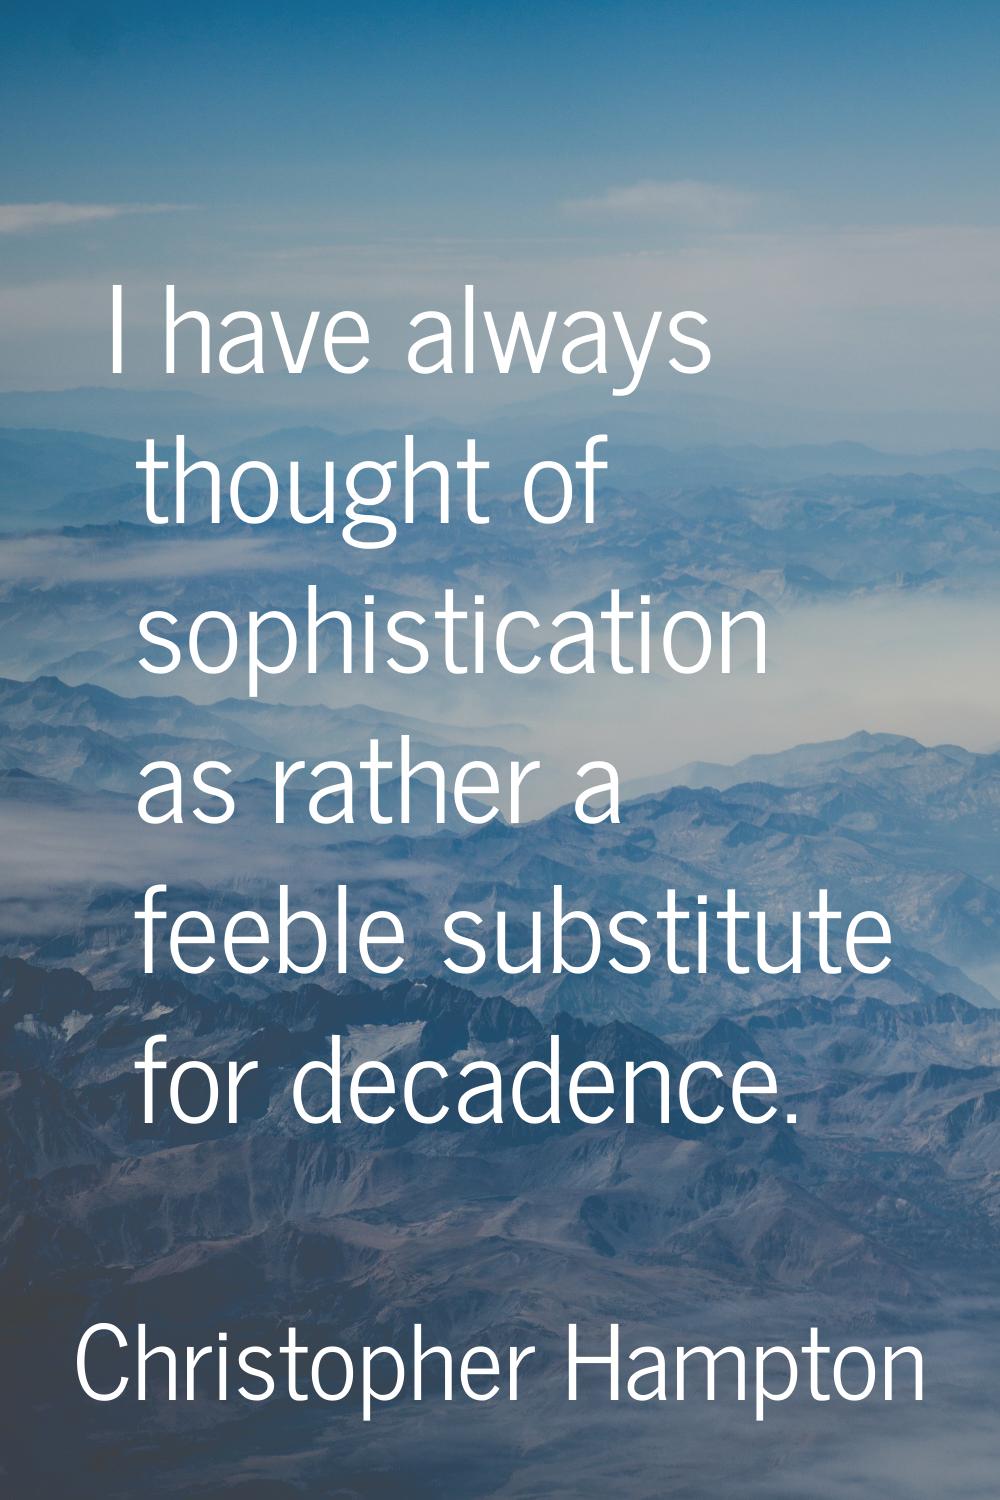 I have always thought of sophistication as rather a feeble substitute for decadence.